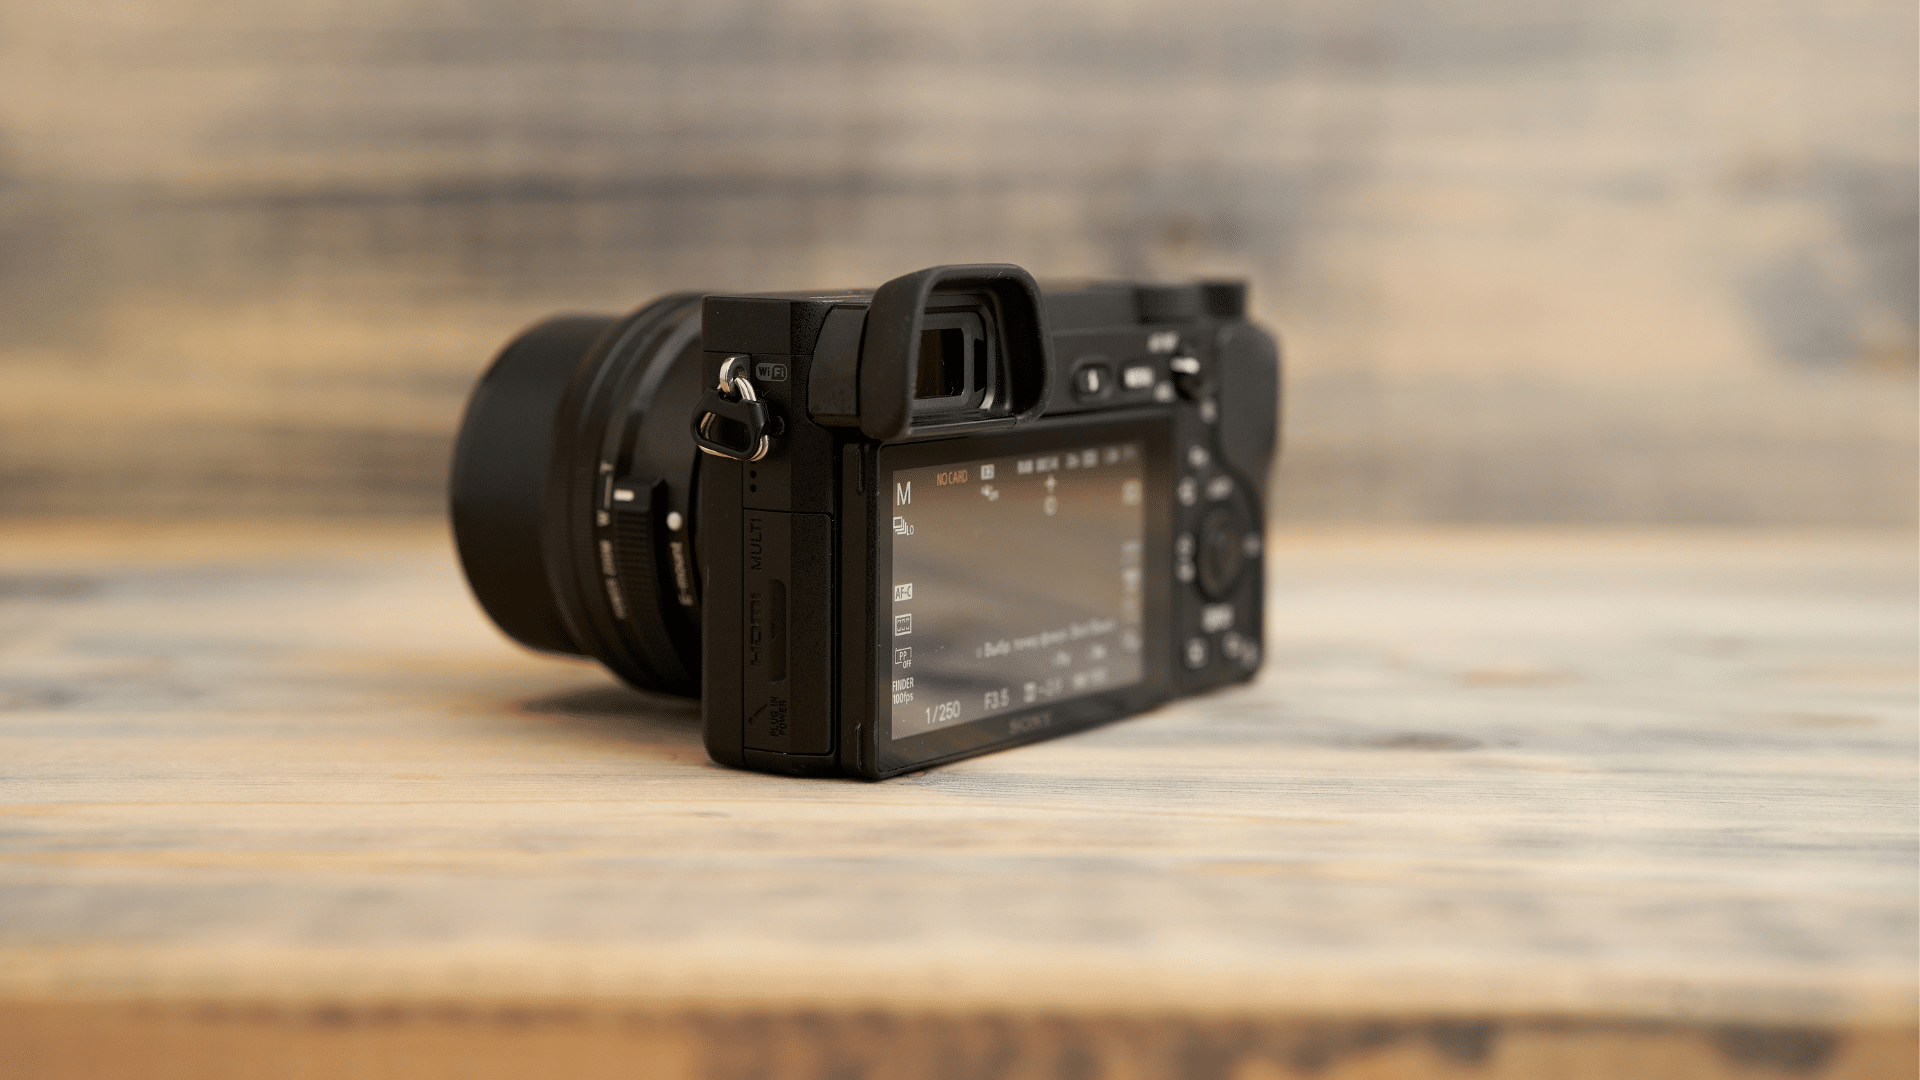 An image showing the back of a mirrorless camera with a digital display instead of a traditional optical viewfinder, illustrating what is a mirrorless camera.